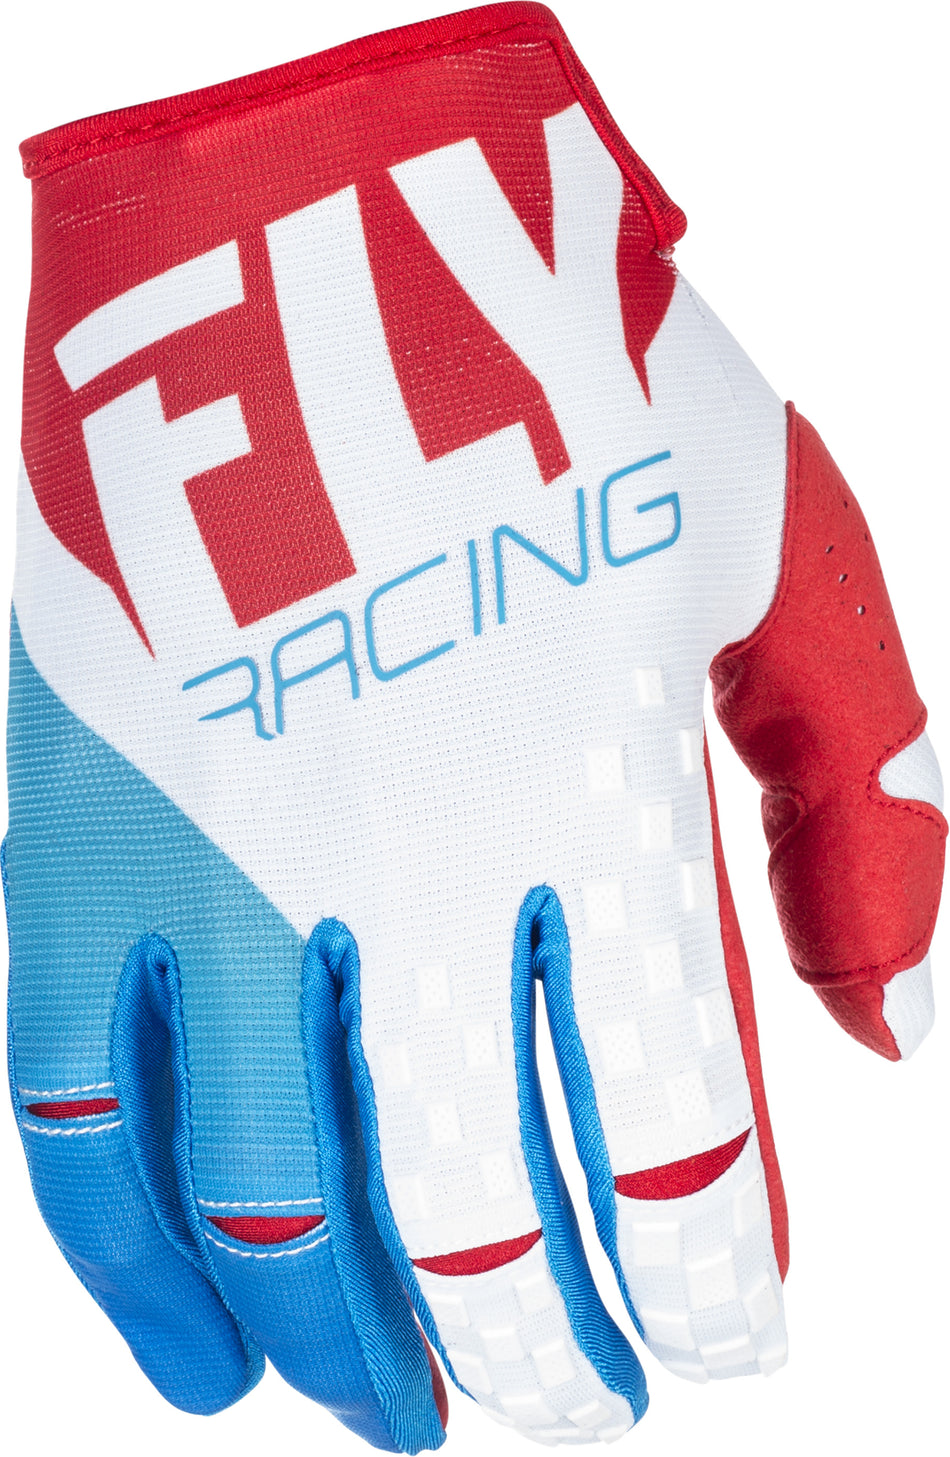 FLY RACING Kinetic Gloves Red/White/Blue Sz 12 371-41312